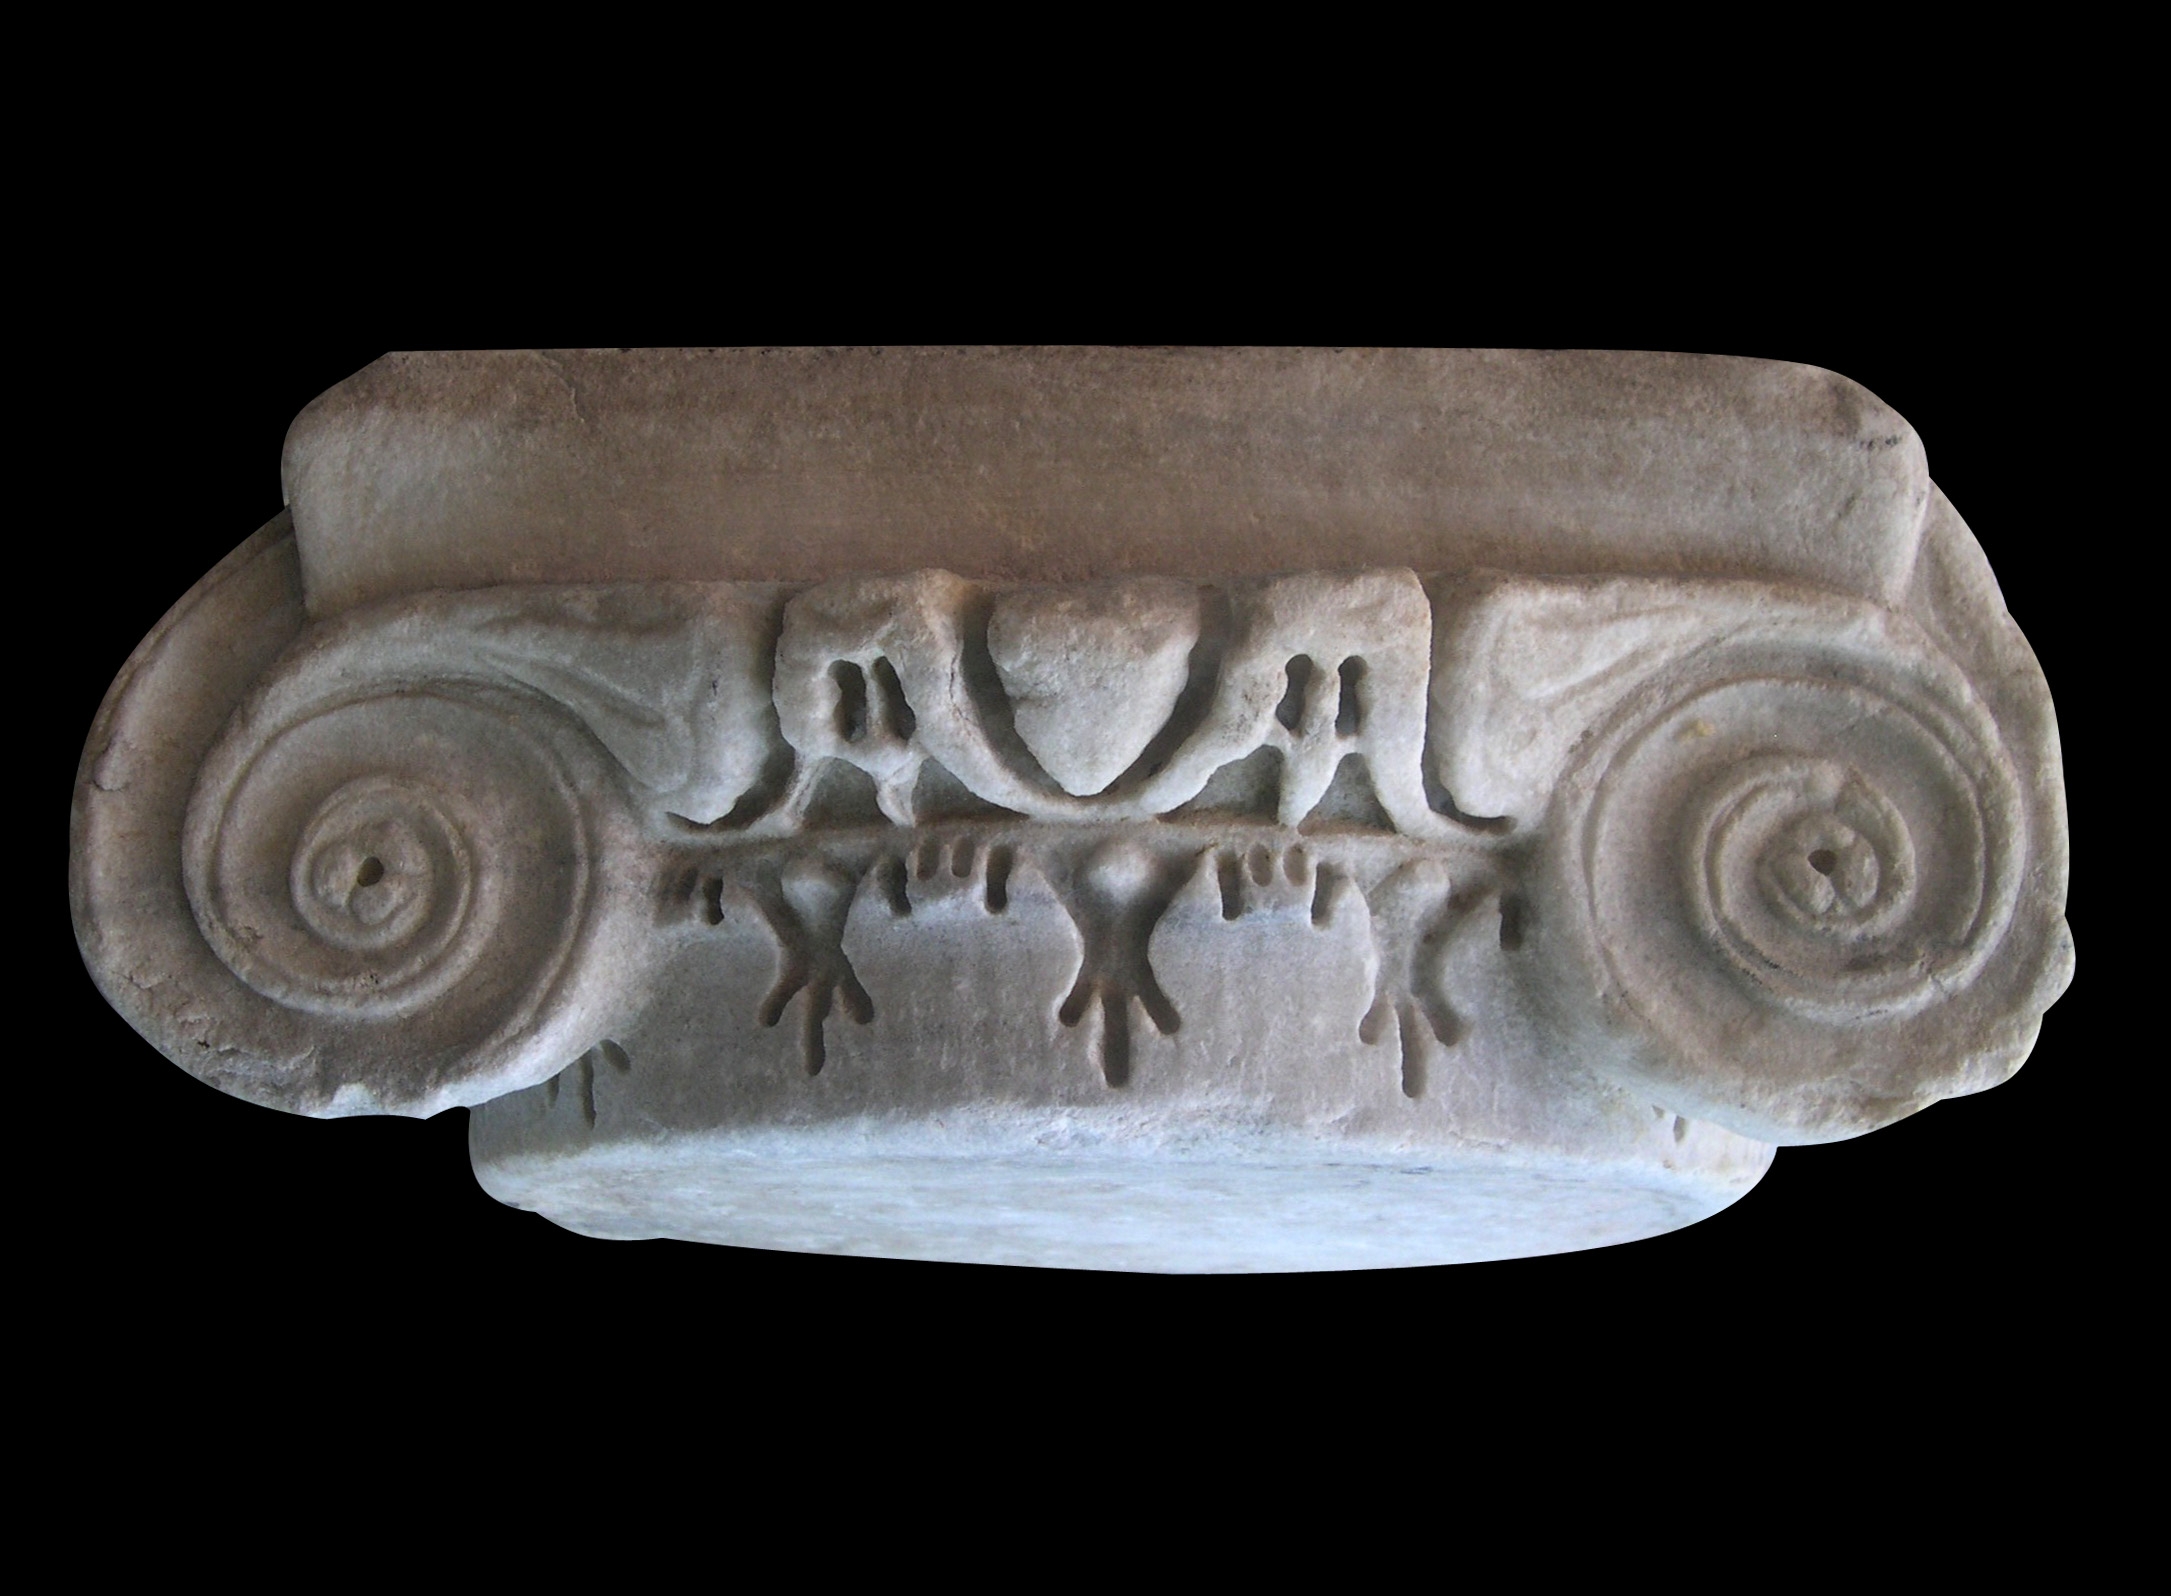 Ionic capital with neck of acanthus-like leaves